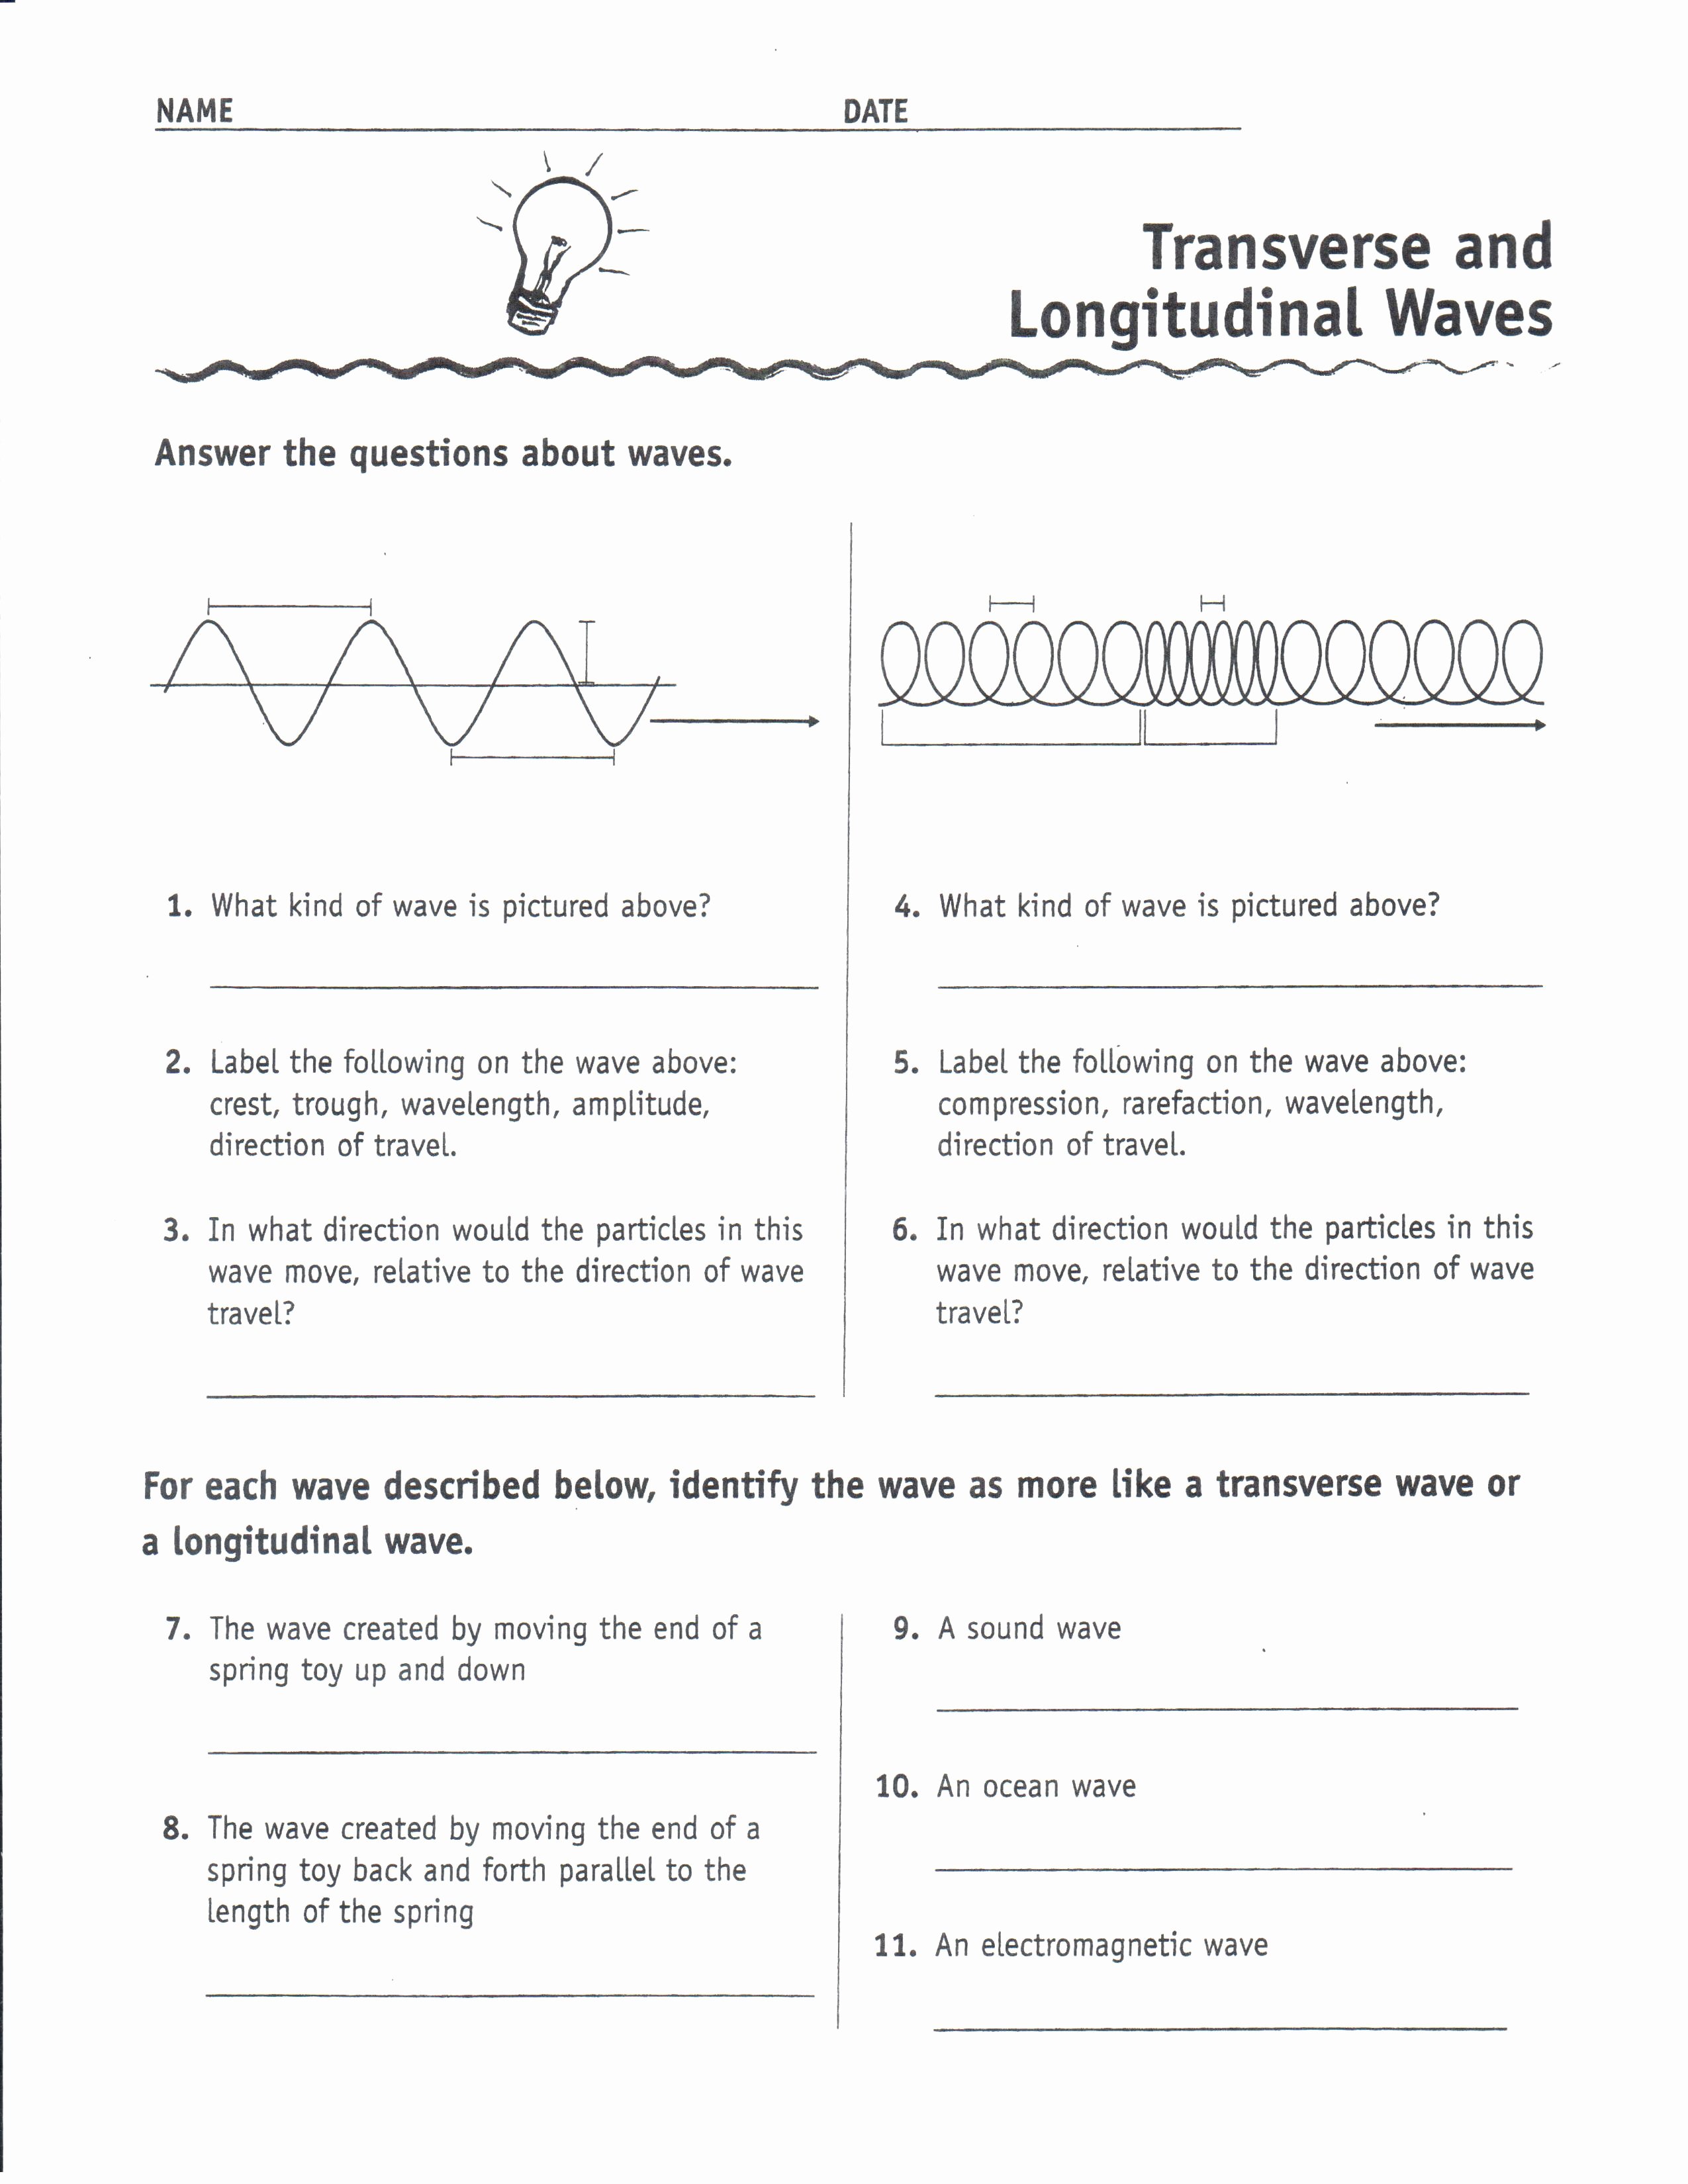 Waves Worksheet Answer Key Inspirational Physical Science March 2013